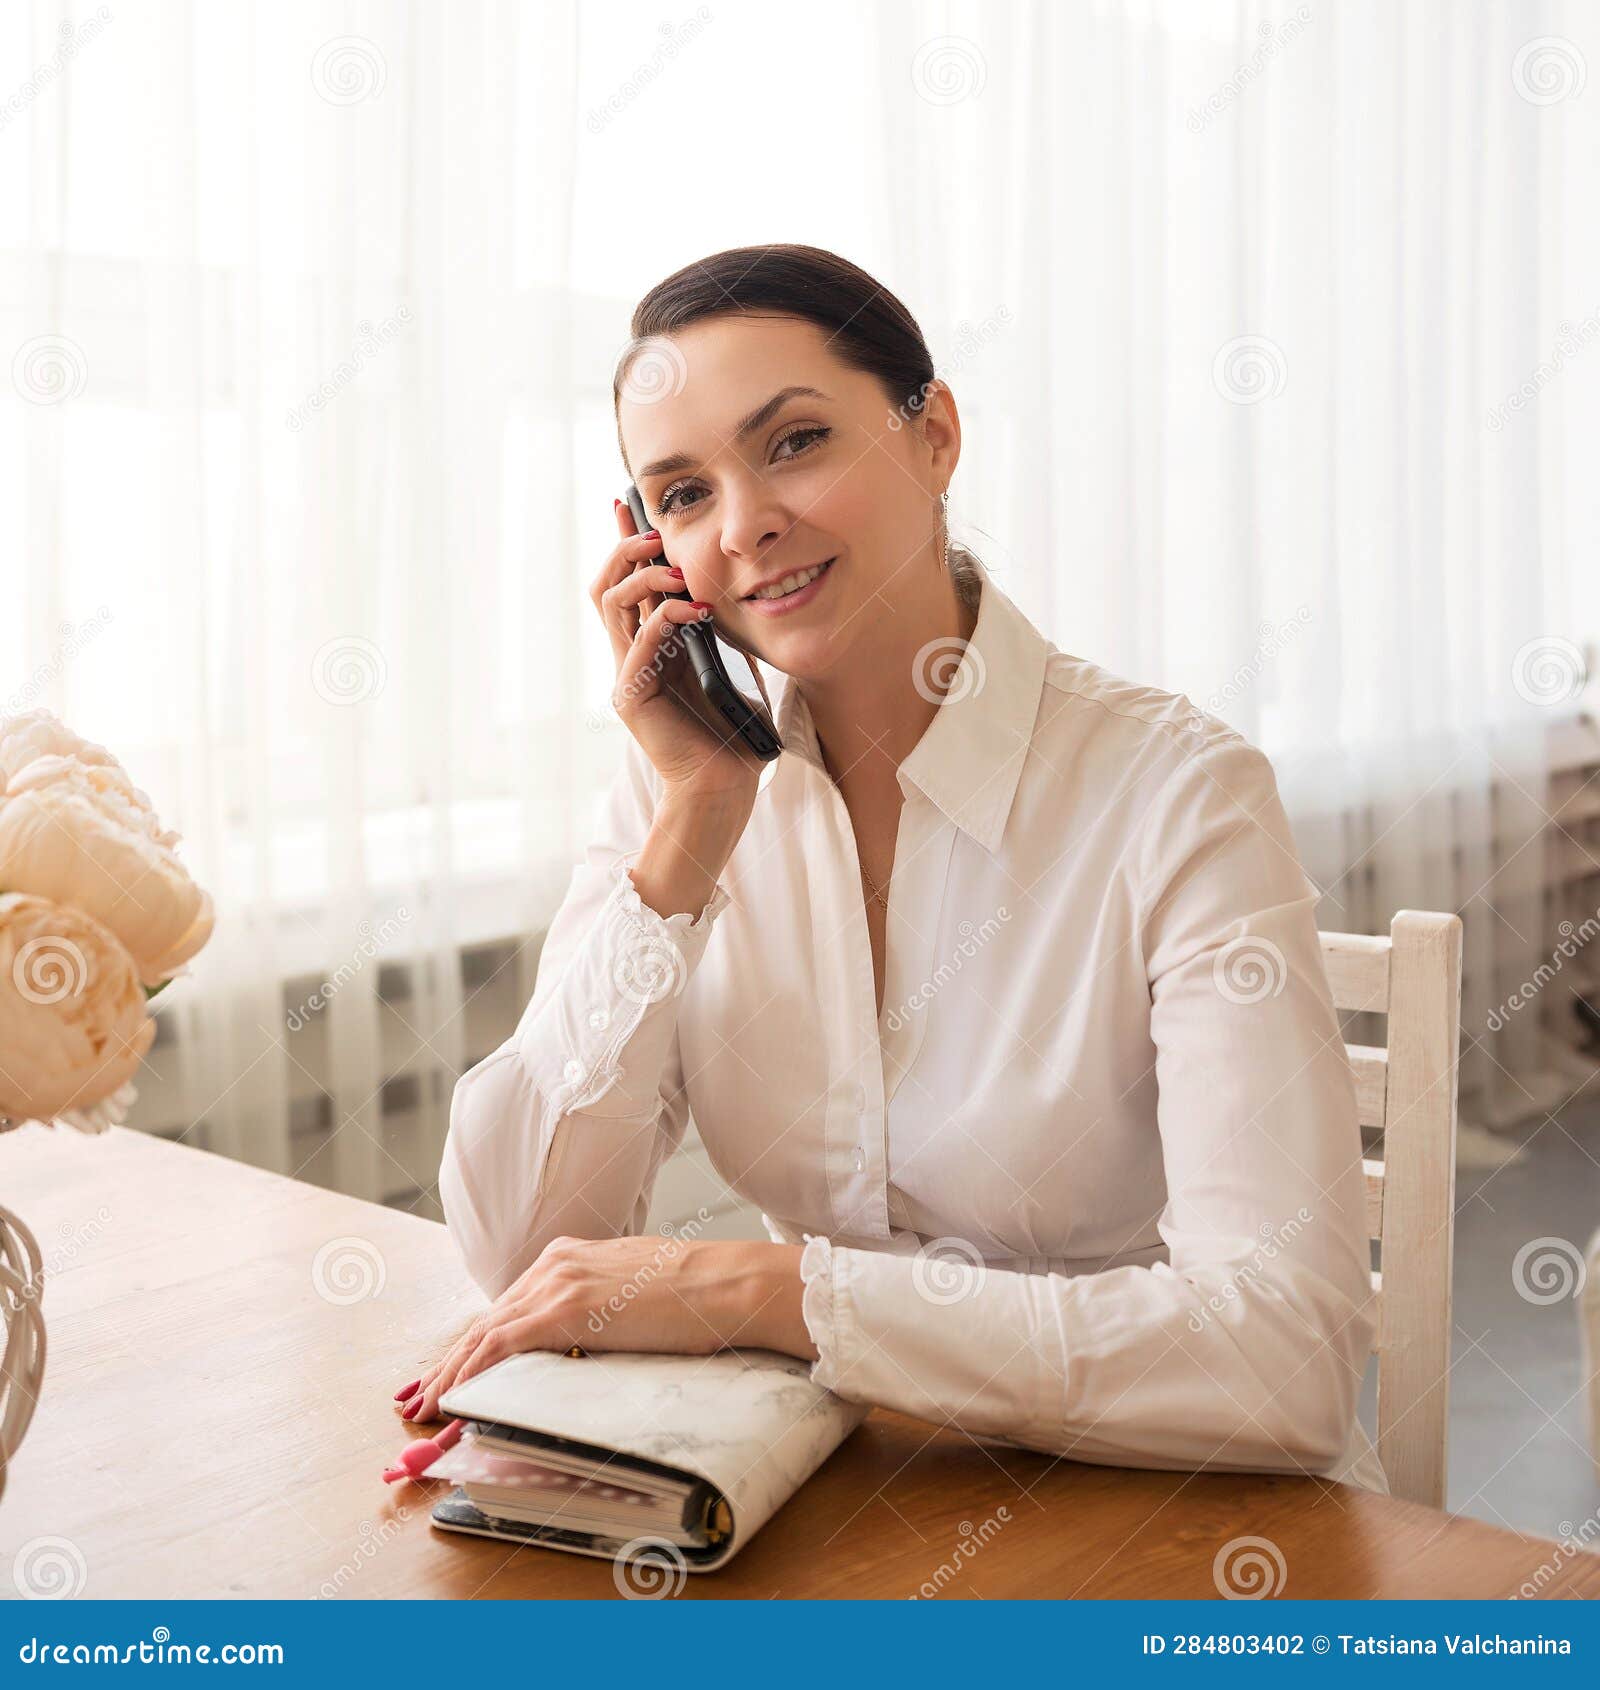 portrait of a smiling businesswoman talking on phone at home